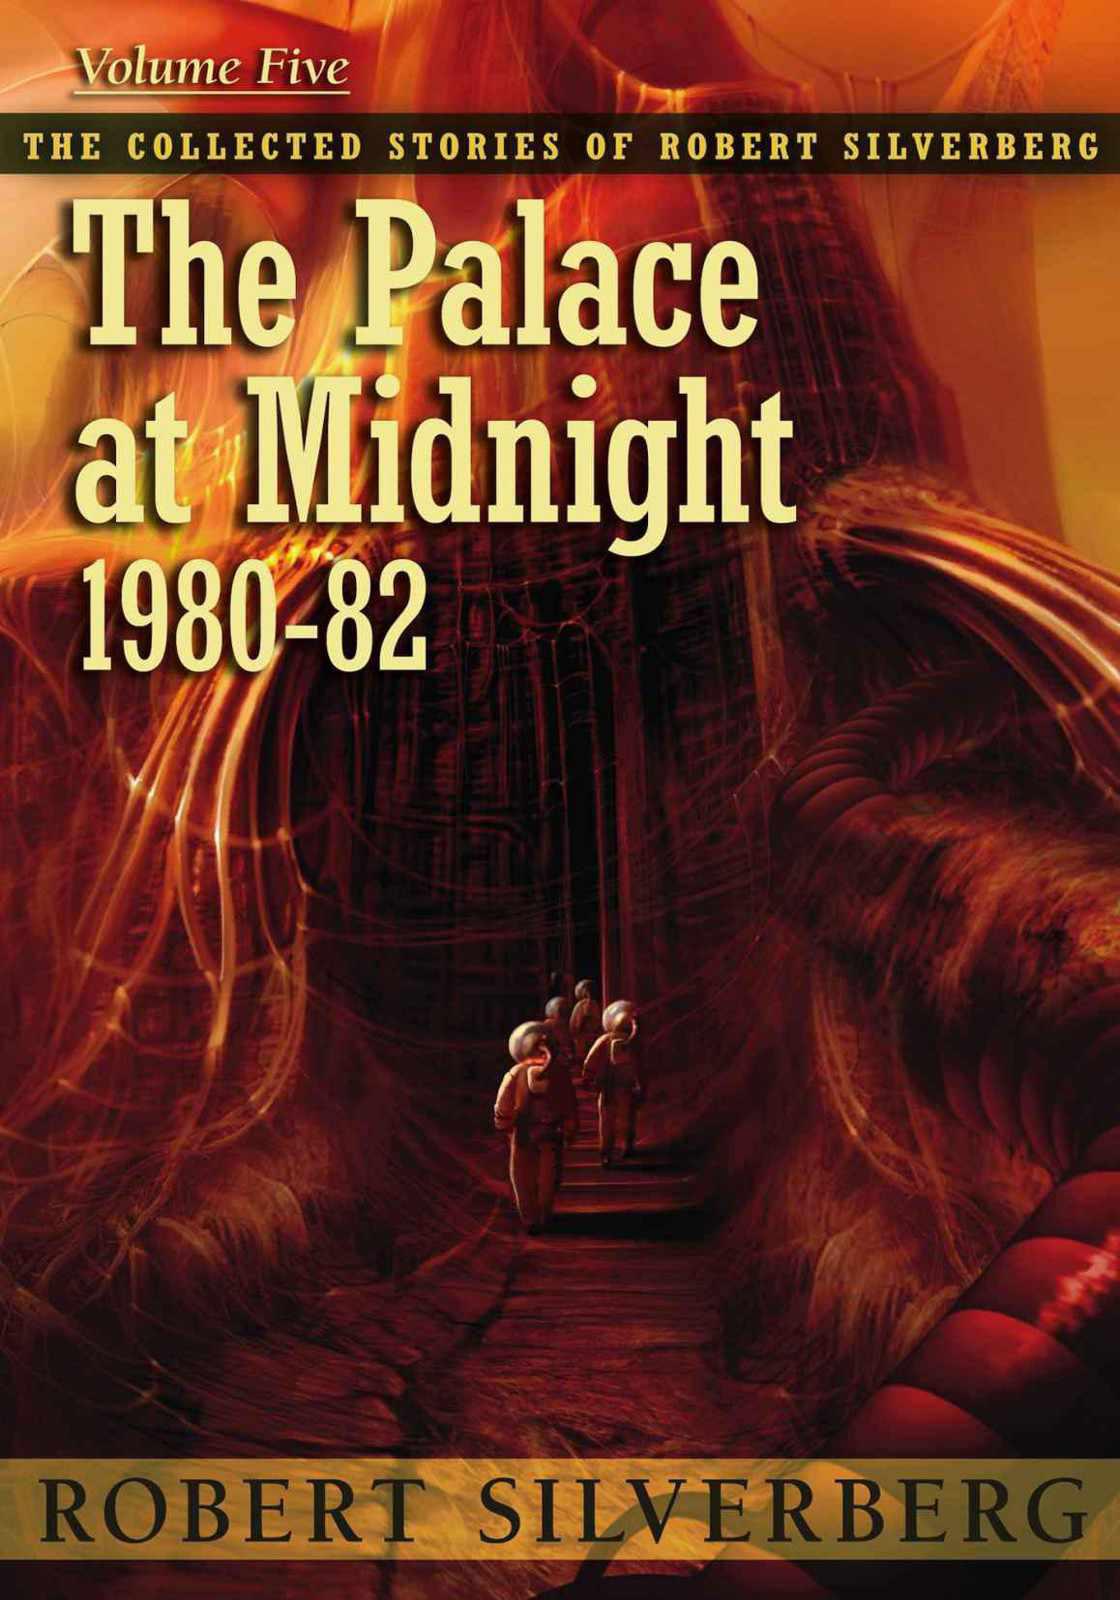 The Palace at Midnight: 1980-82